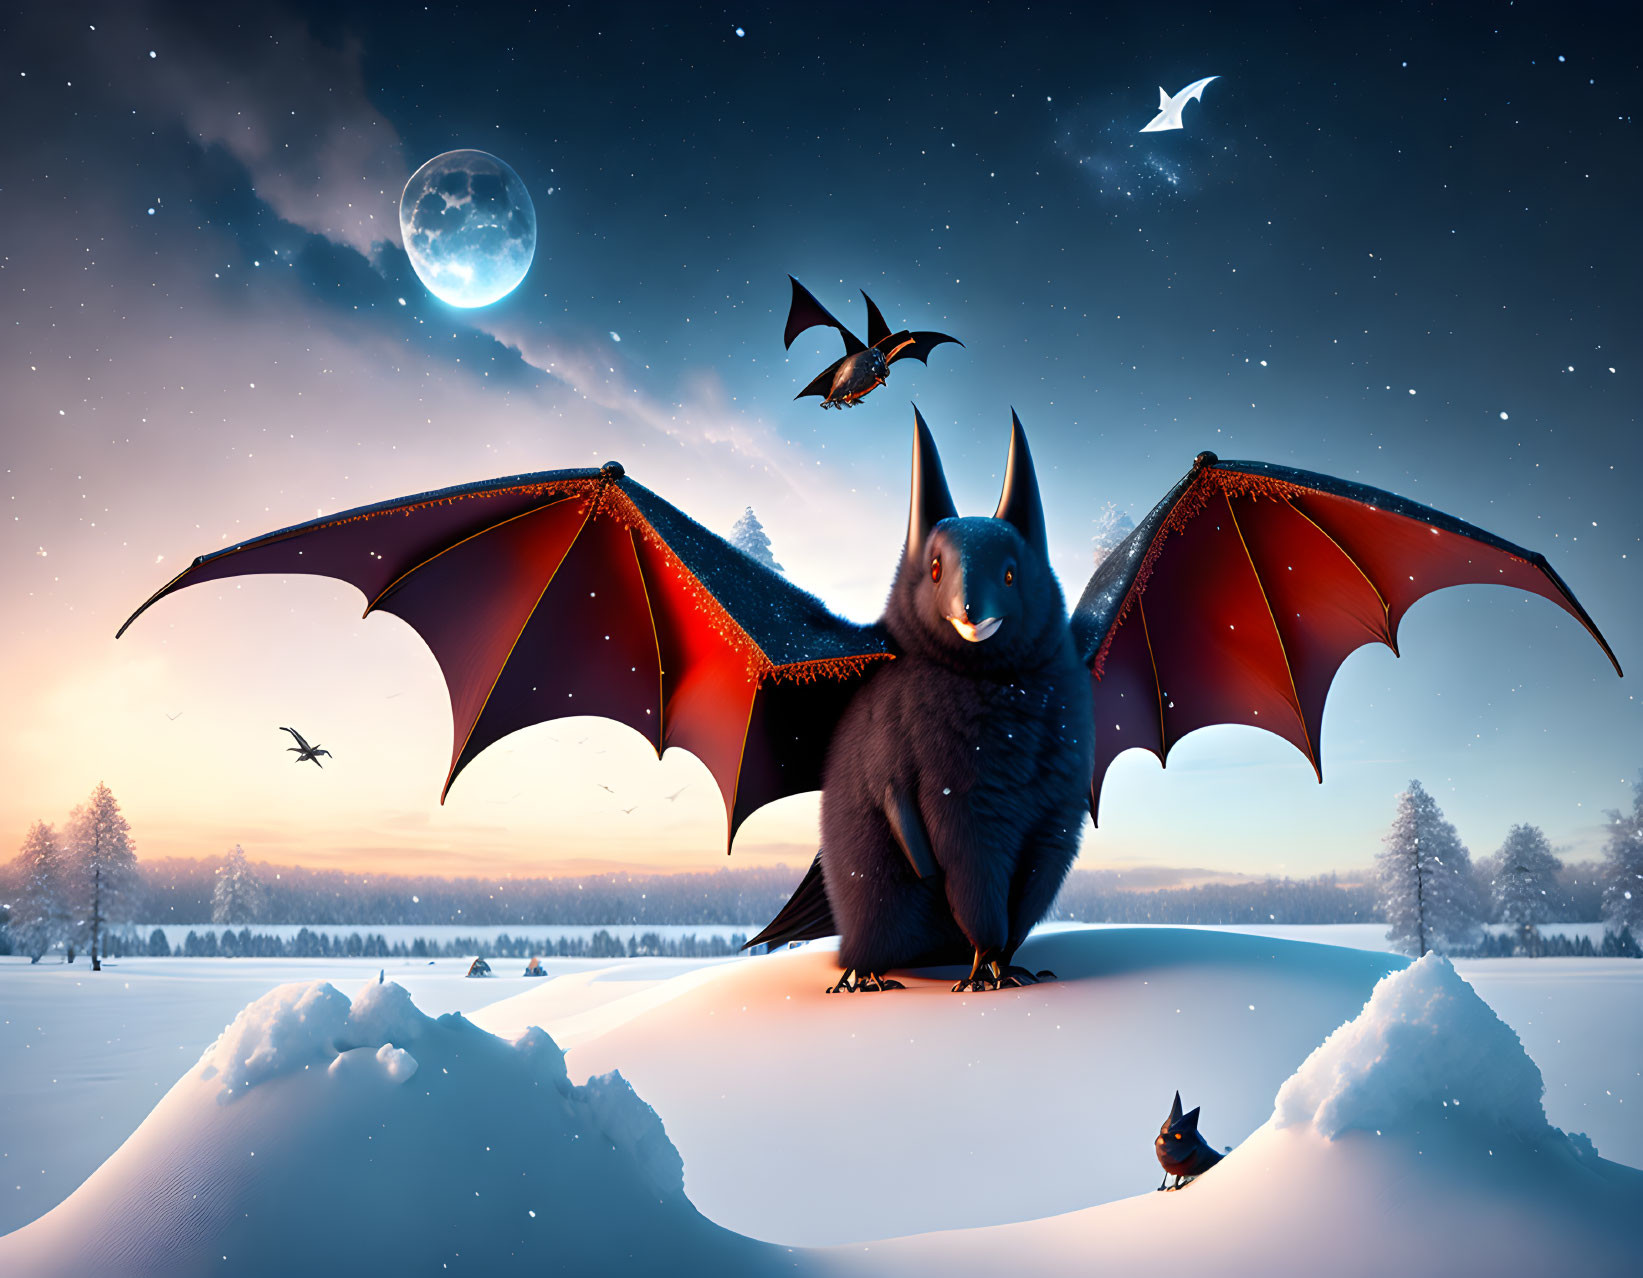 Digital artwork of smiling bats with red wings in snowy landscape